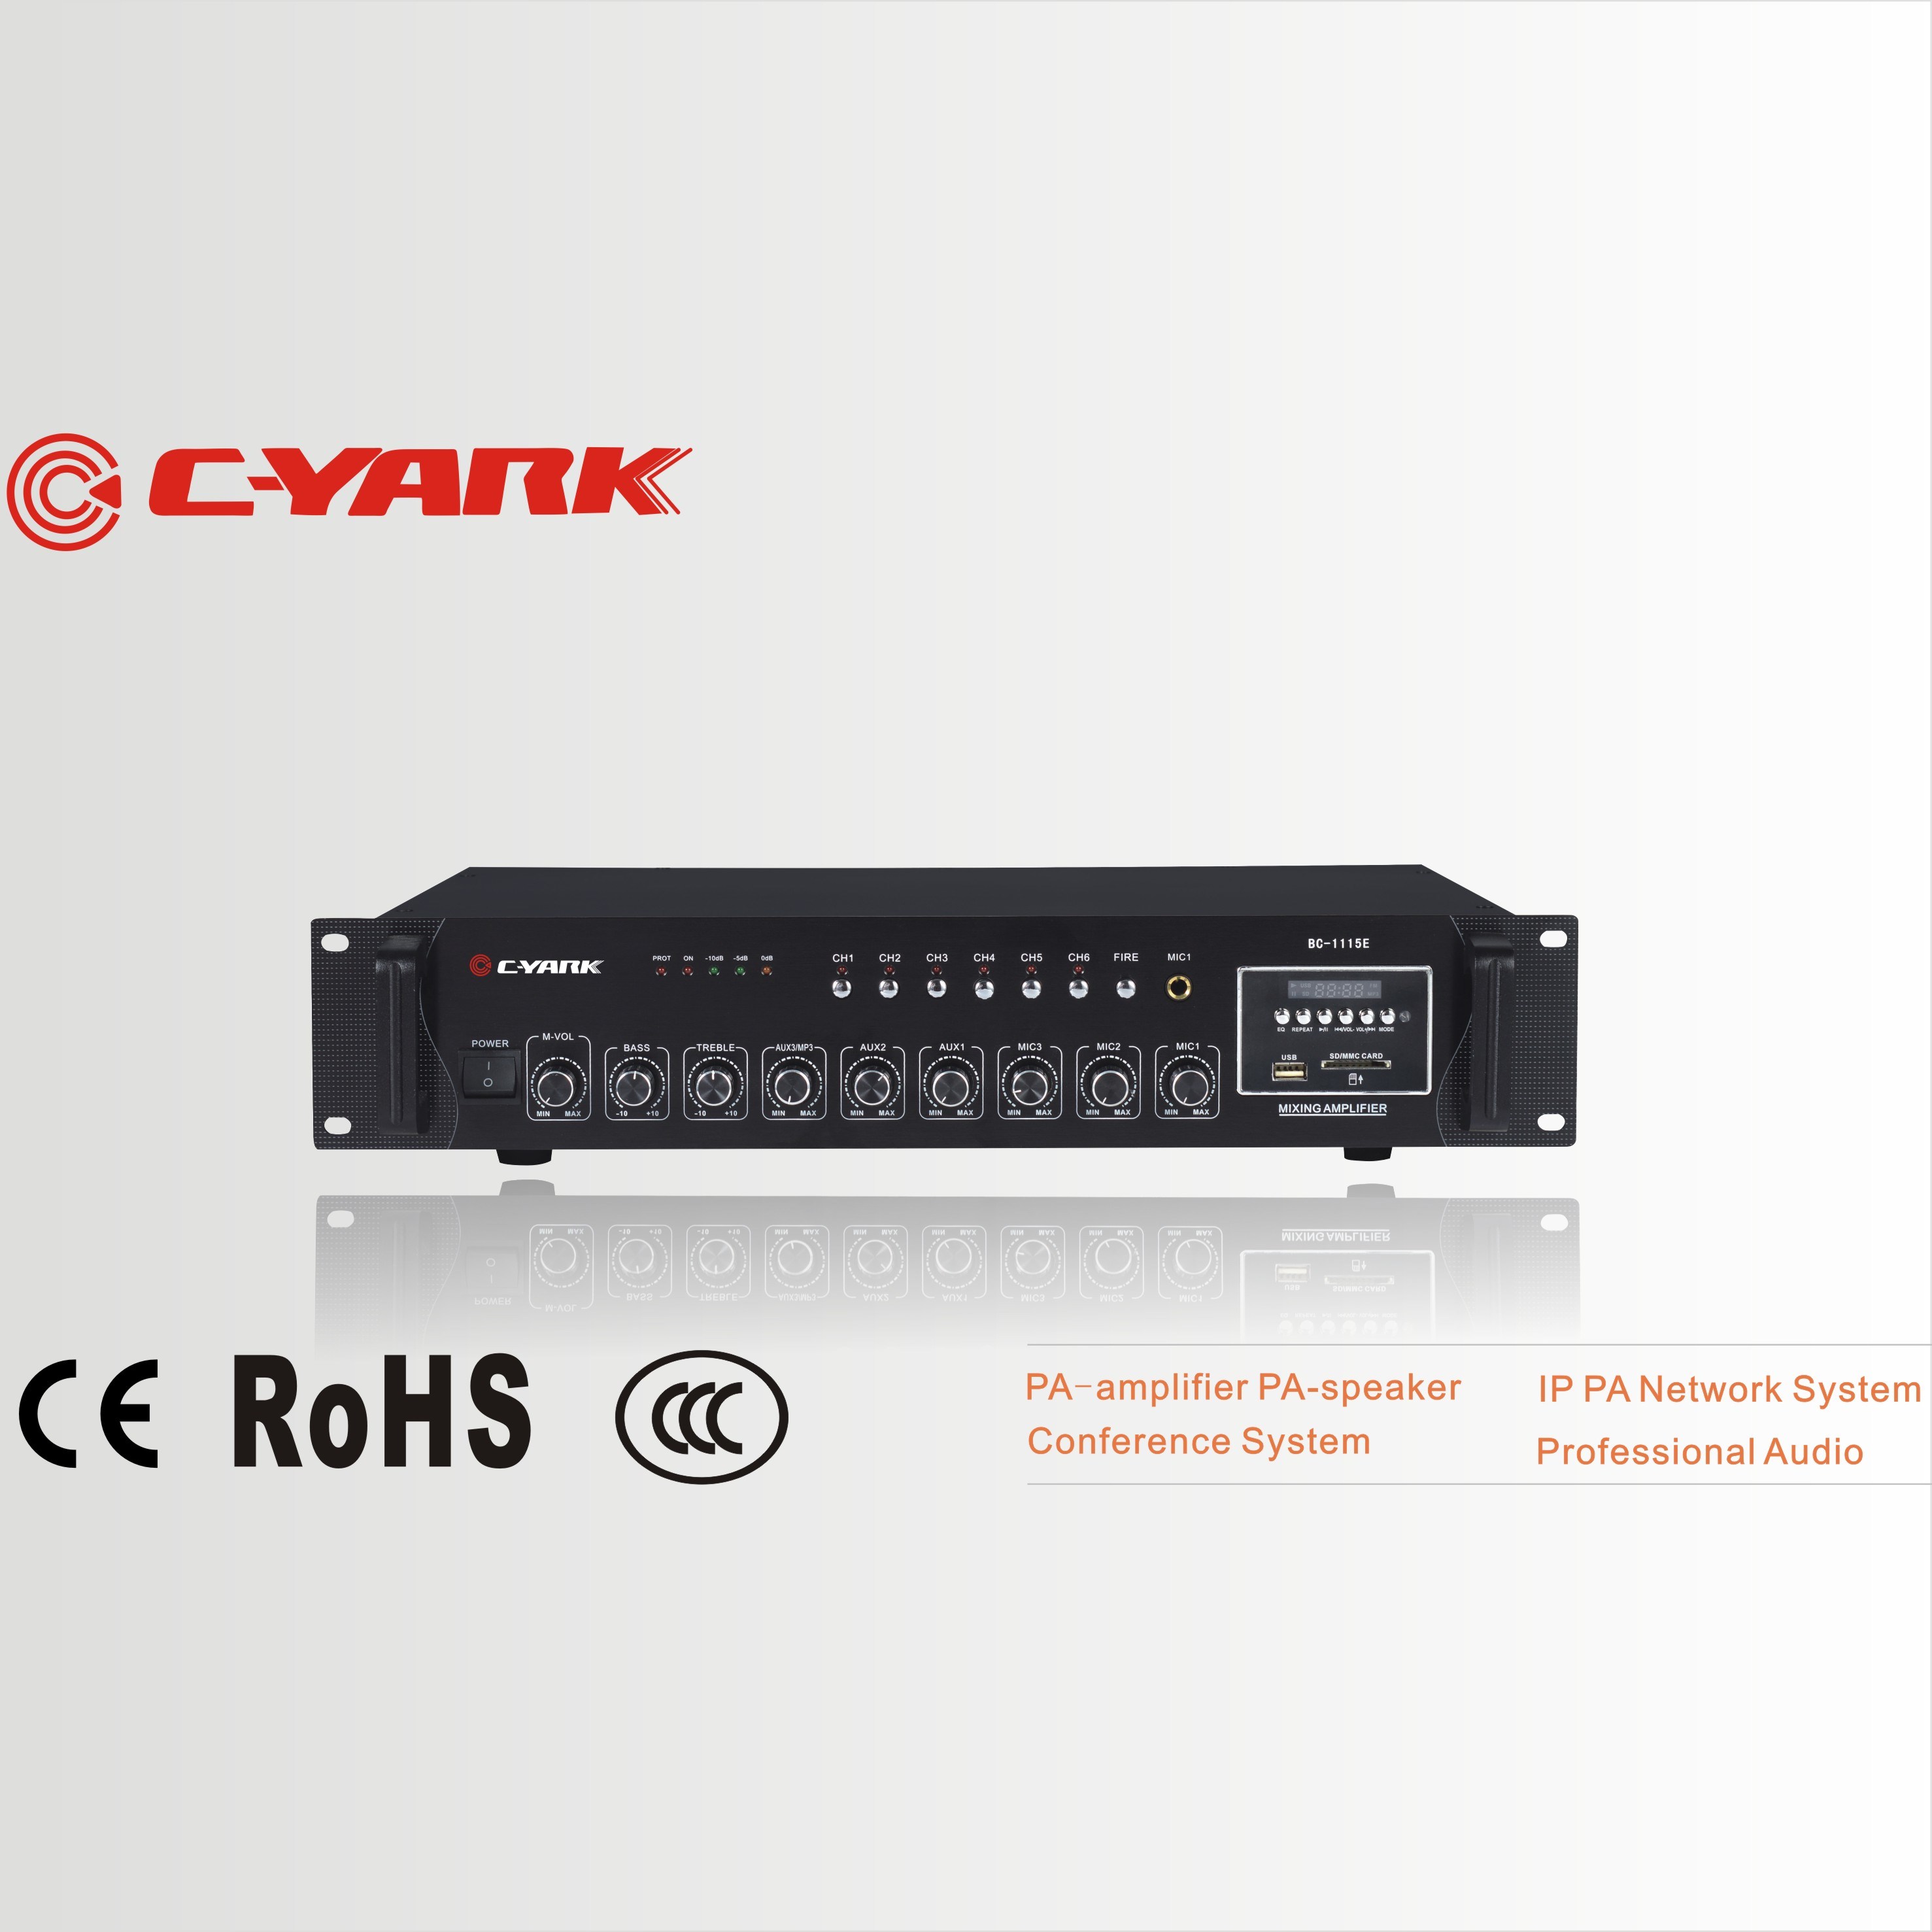 C-Yark Public Address System with 6 Zones and USB Player